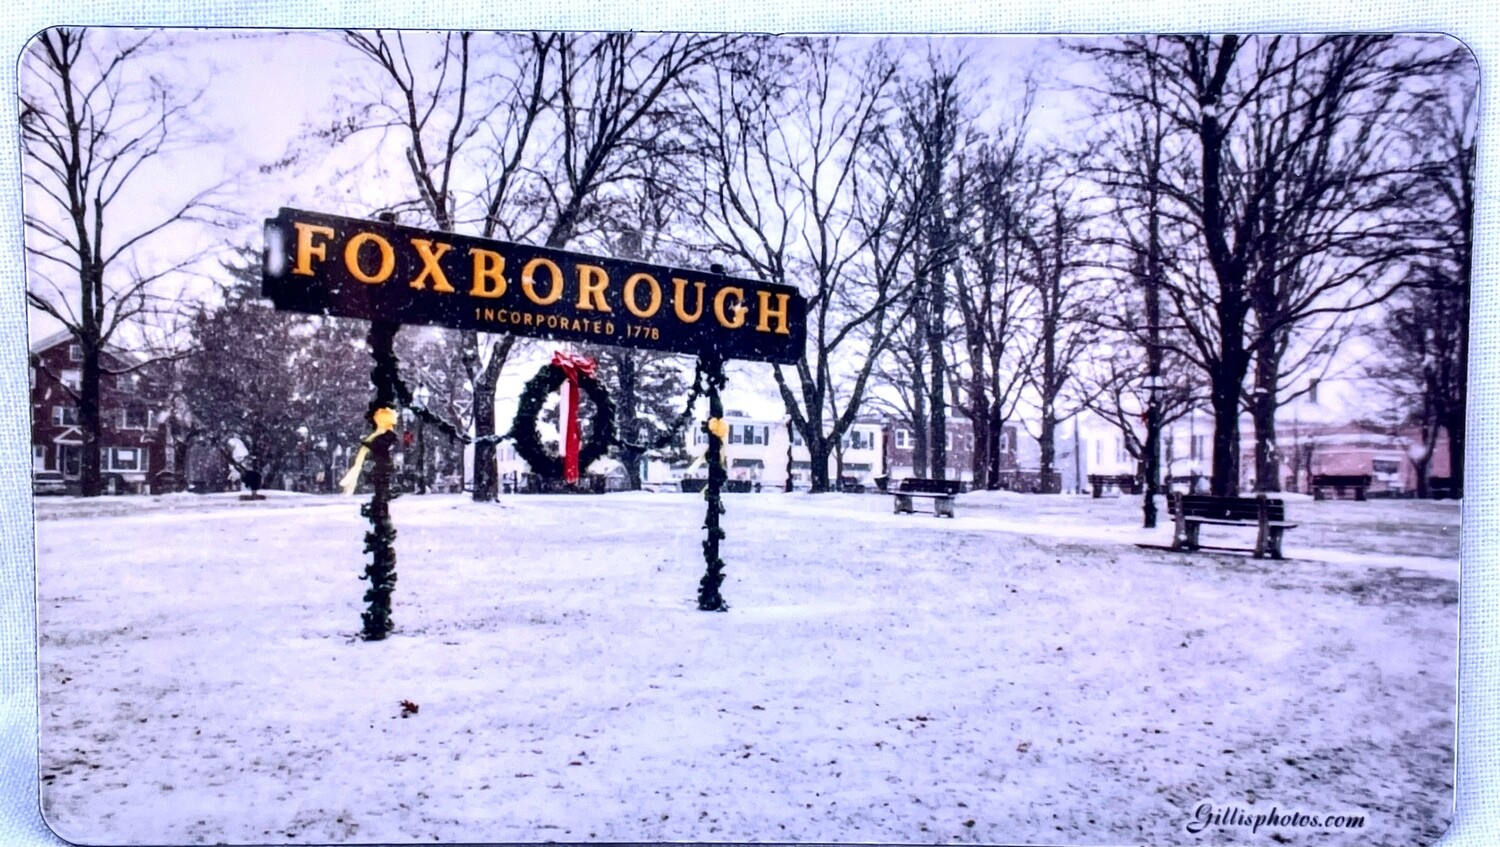 3"x 3" Photo Magnet With Image of Foxboro Sign in Snow